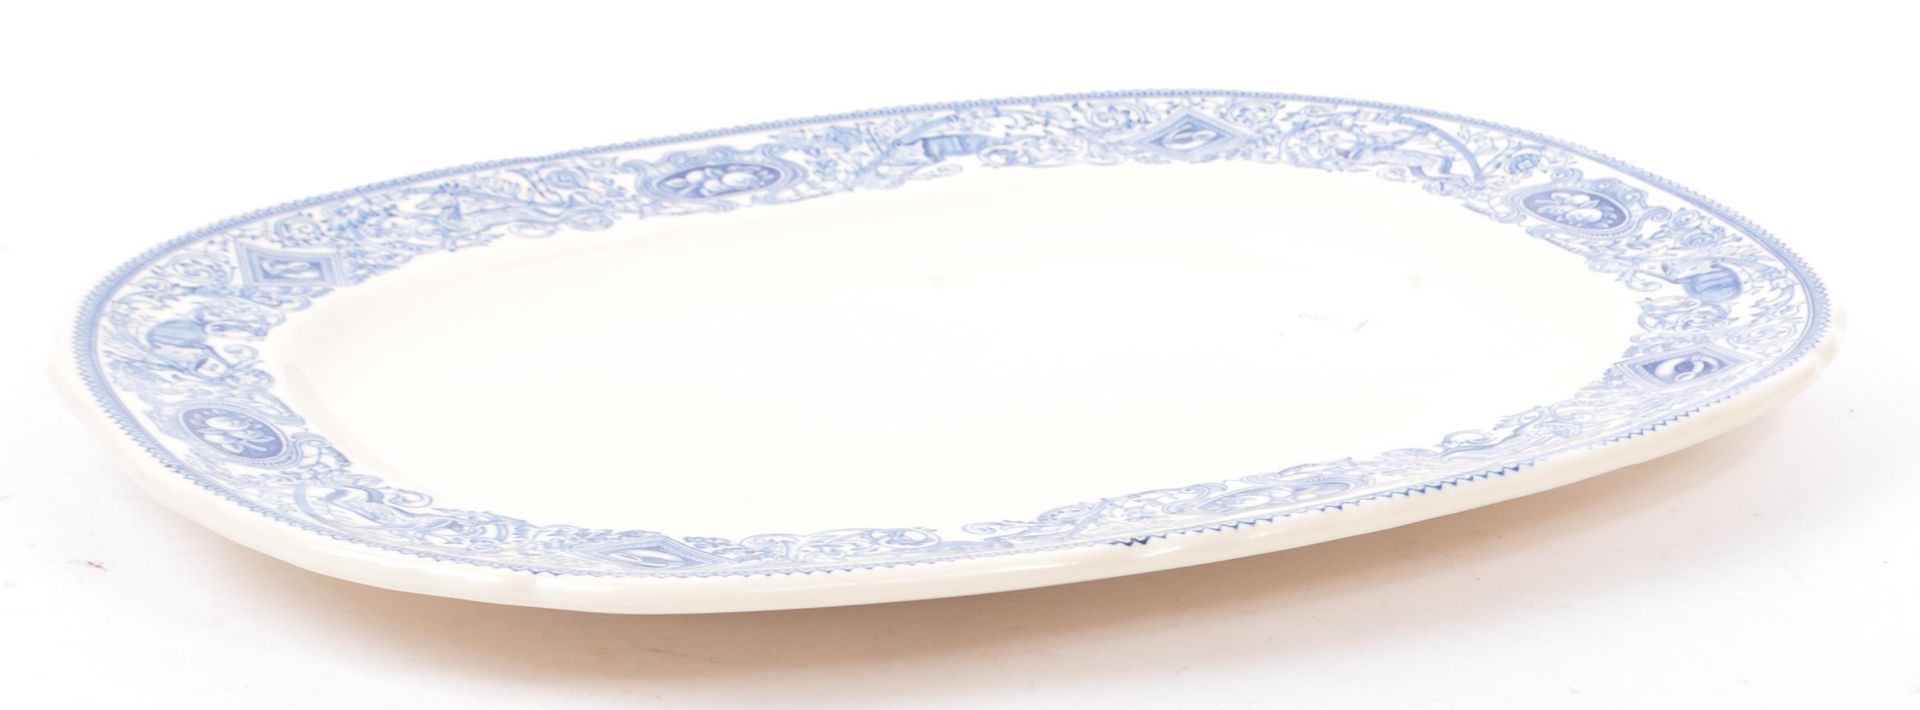 MULBERRY BLUE & WHITE CHINA PLATTER - Image 6 of 7